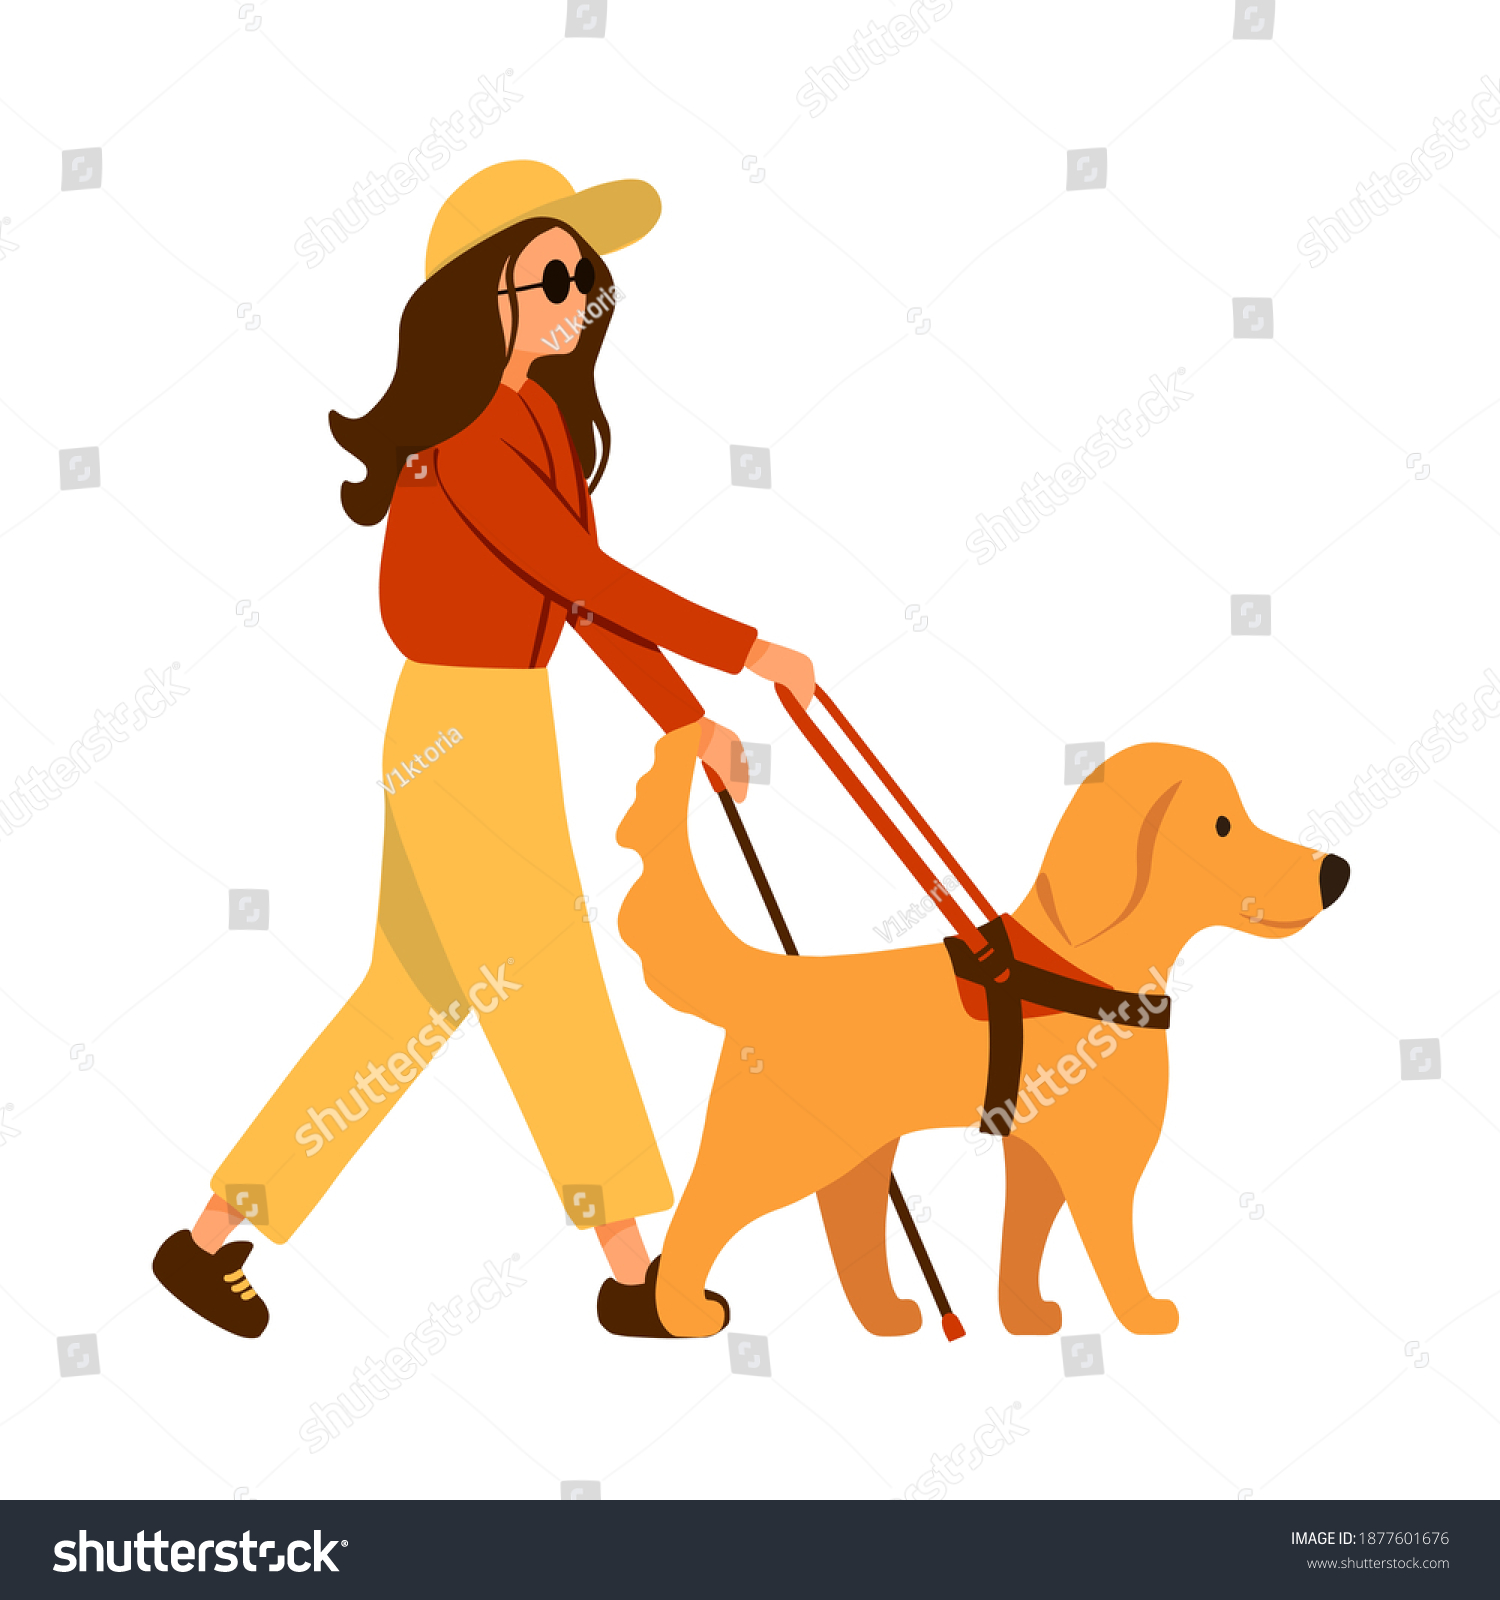 SVG of Blind woman with stick walks beside guide dog leads. Golden Retriever and human isolated on white background cartoon style. Flat design for poster, banner, flyer, web, mockup, business, company, sign. svg